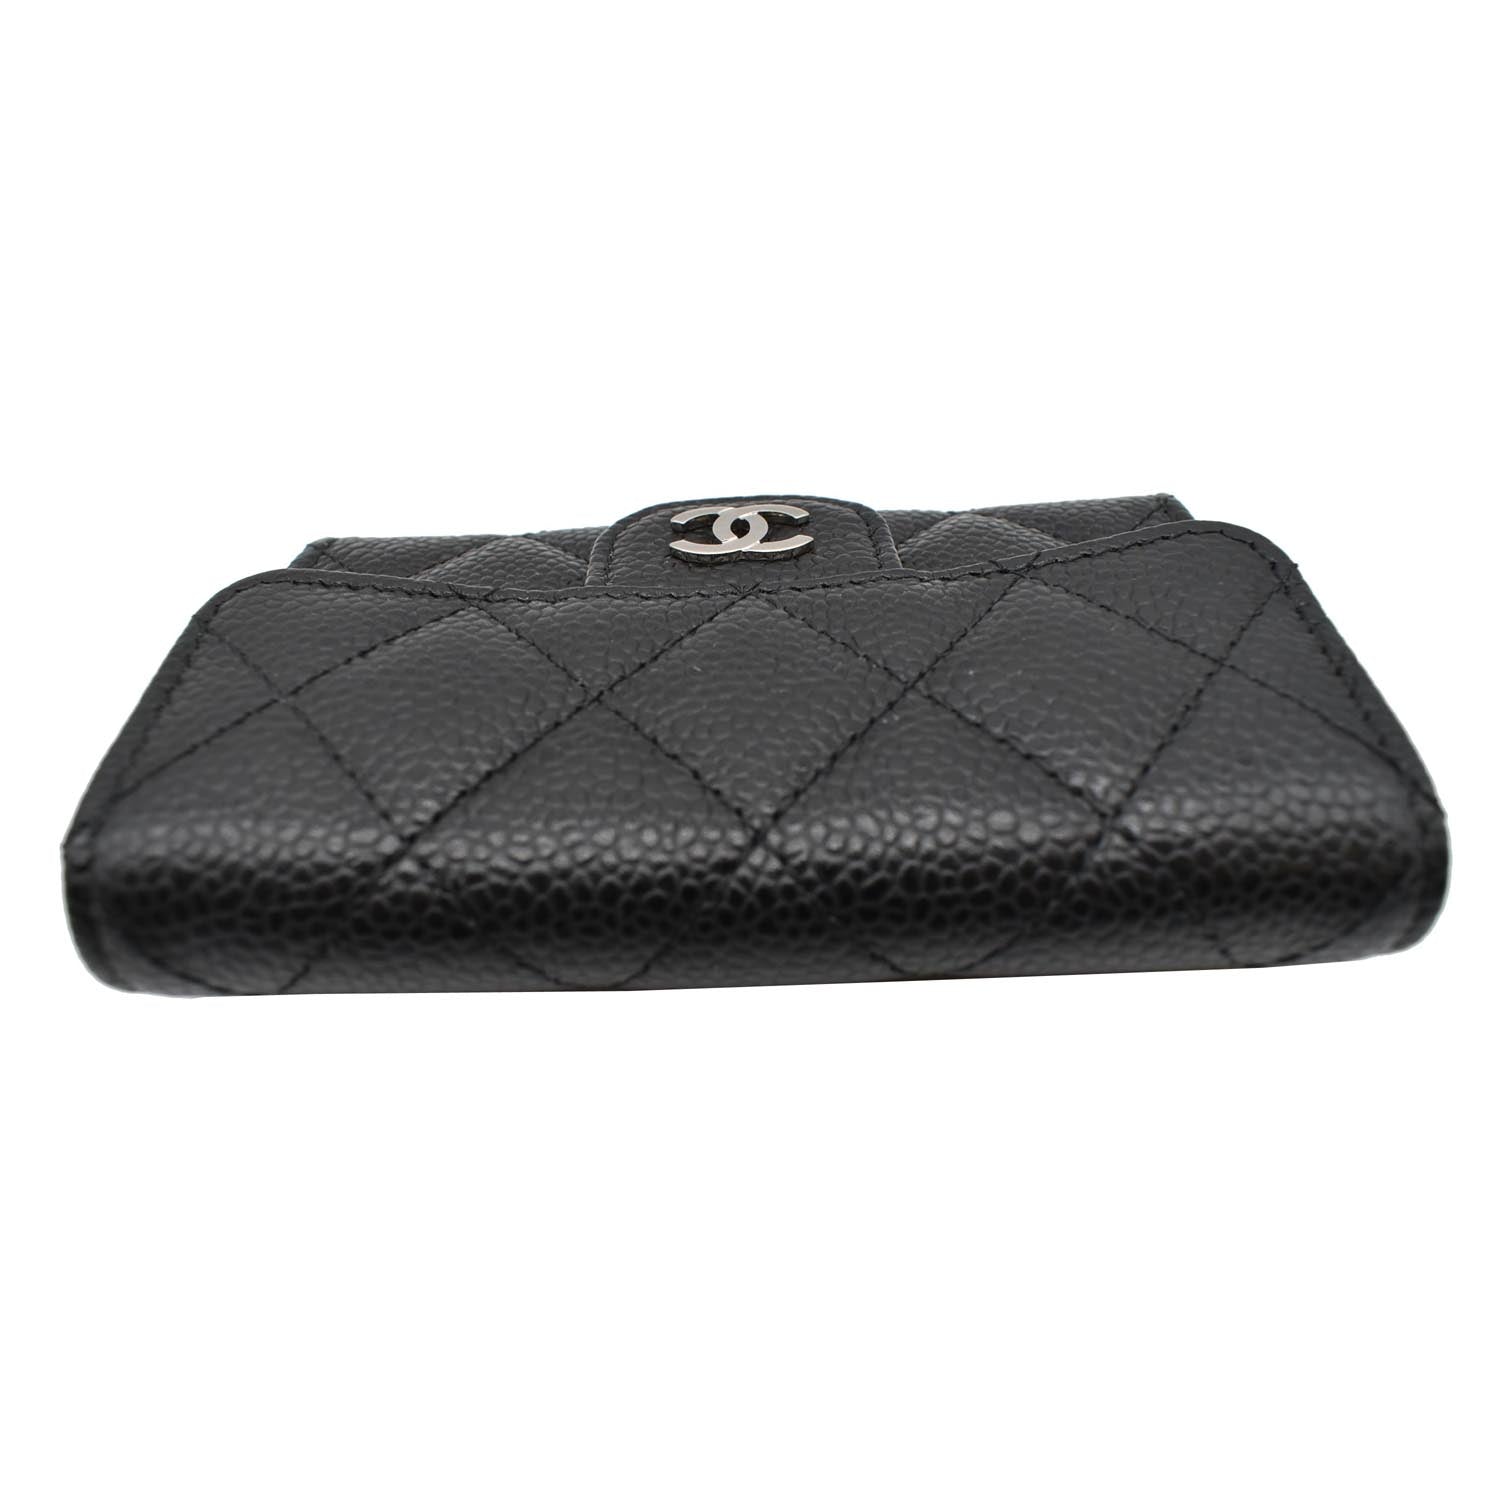 Chanel Classic Flap Card Holder: Black cavier with GHW